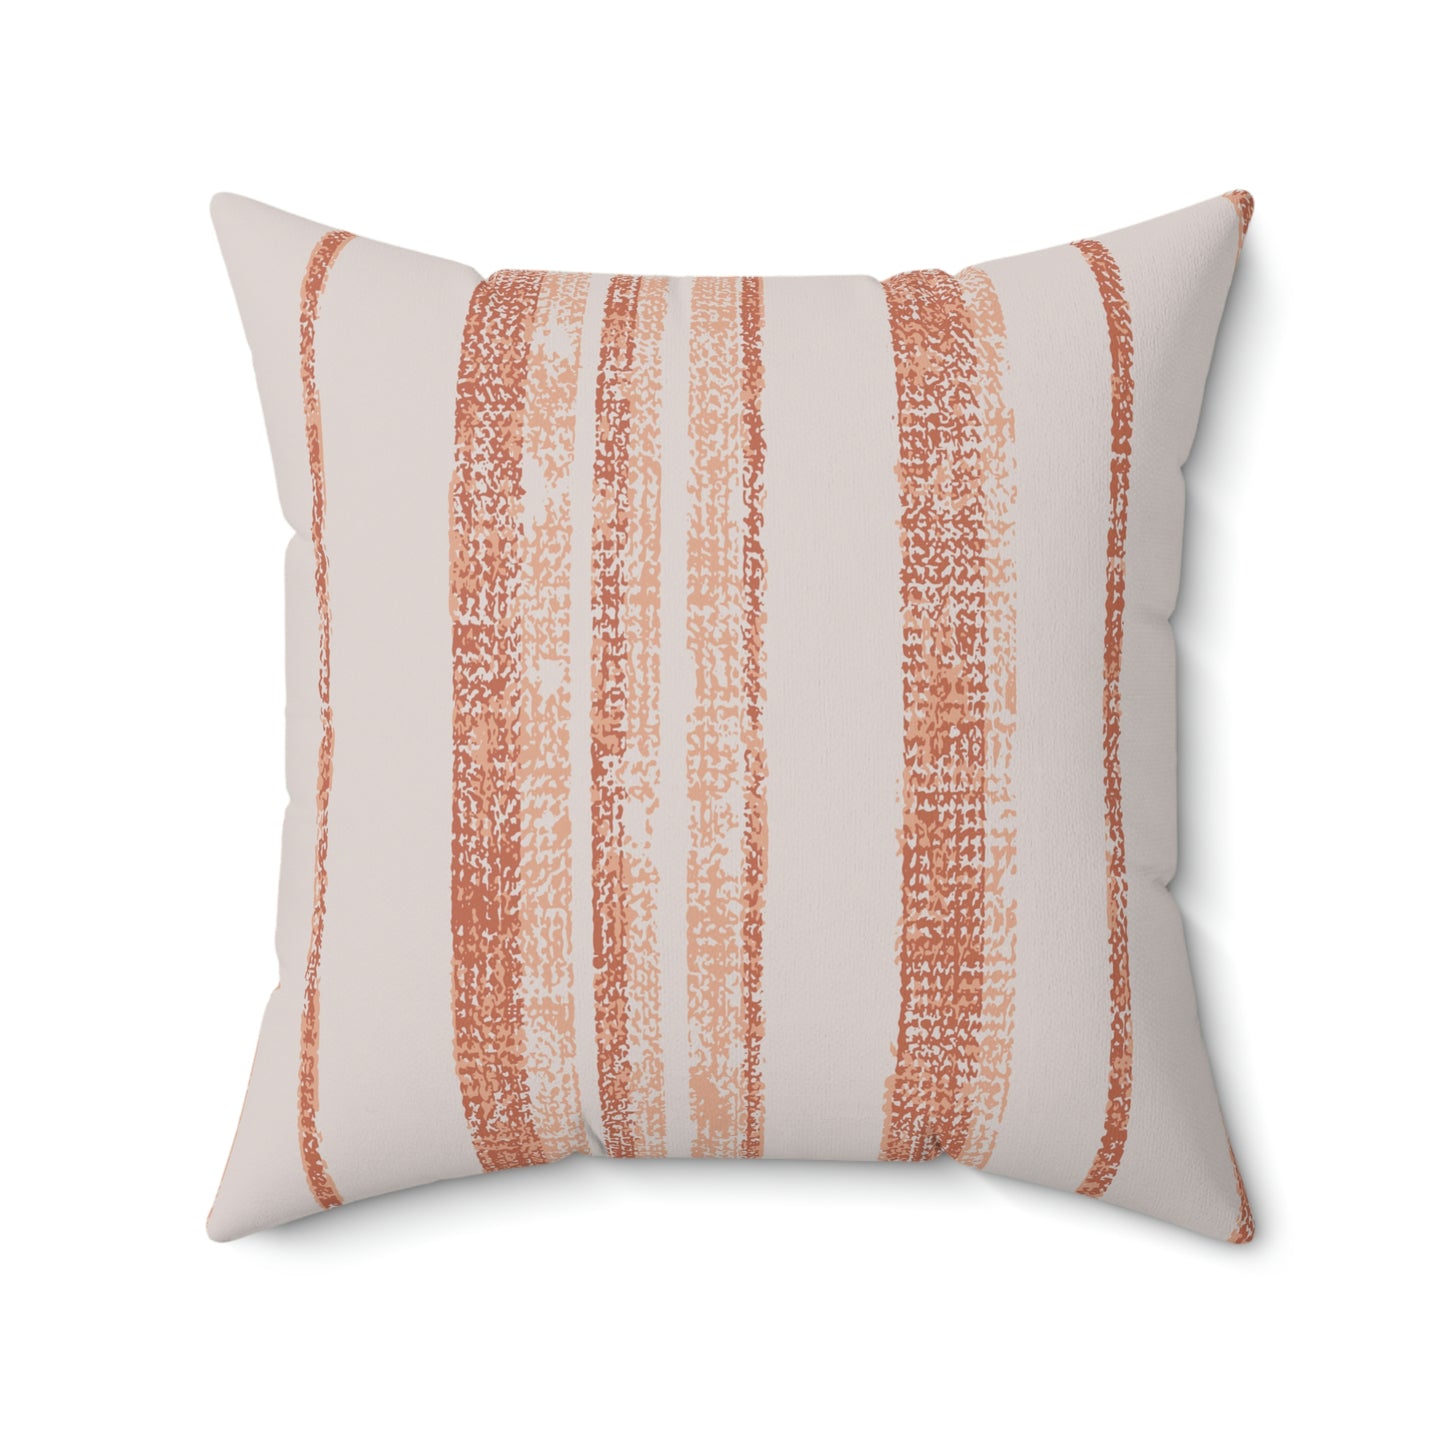 Hatched Stripes Pillow Cover